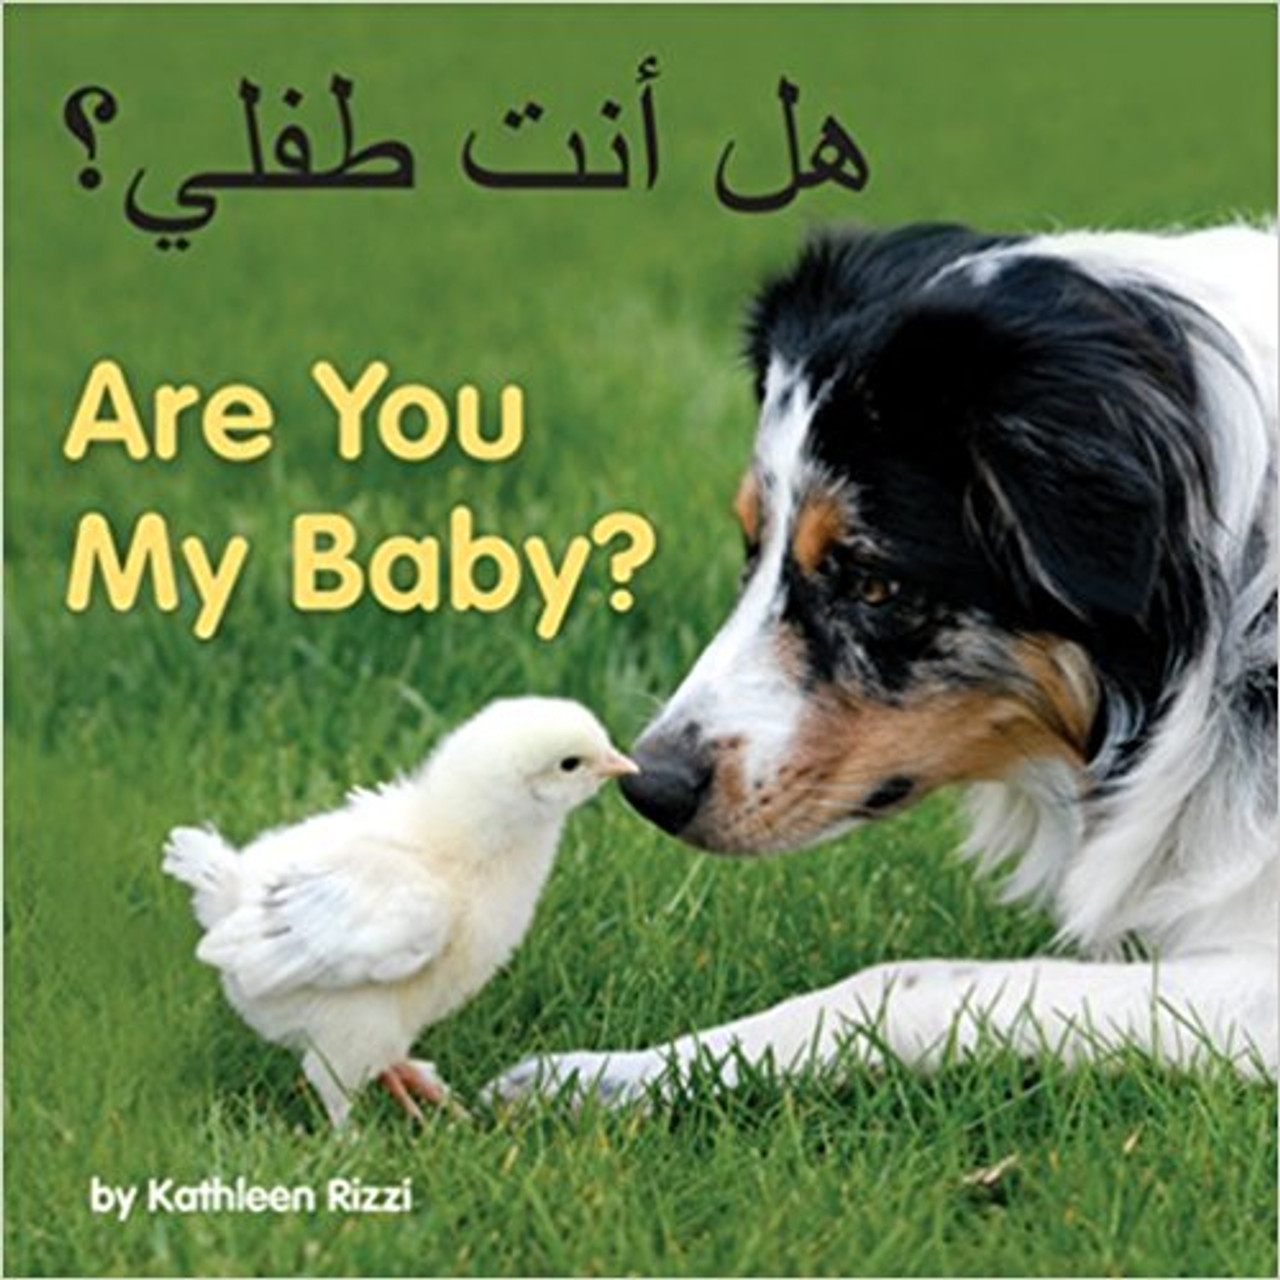 Are You My Baby? (Arabic) by Kathleen Rizzi